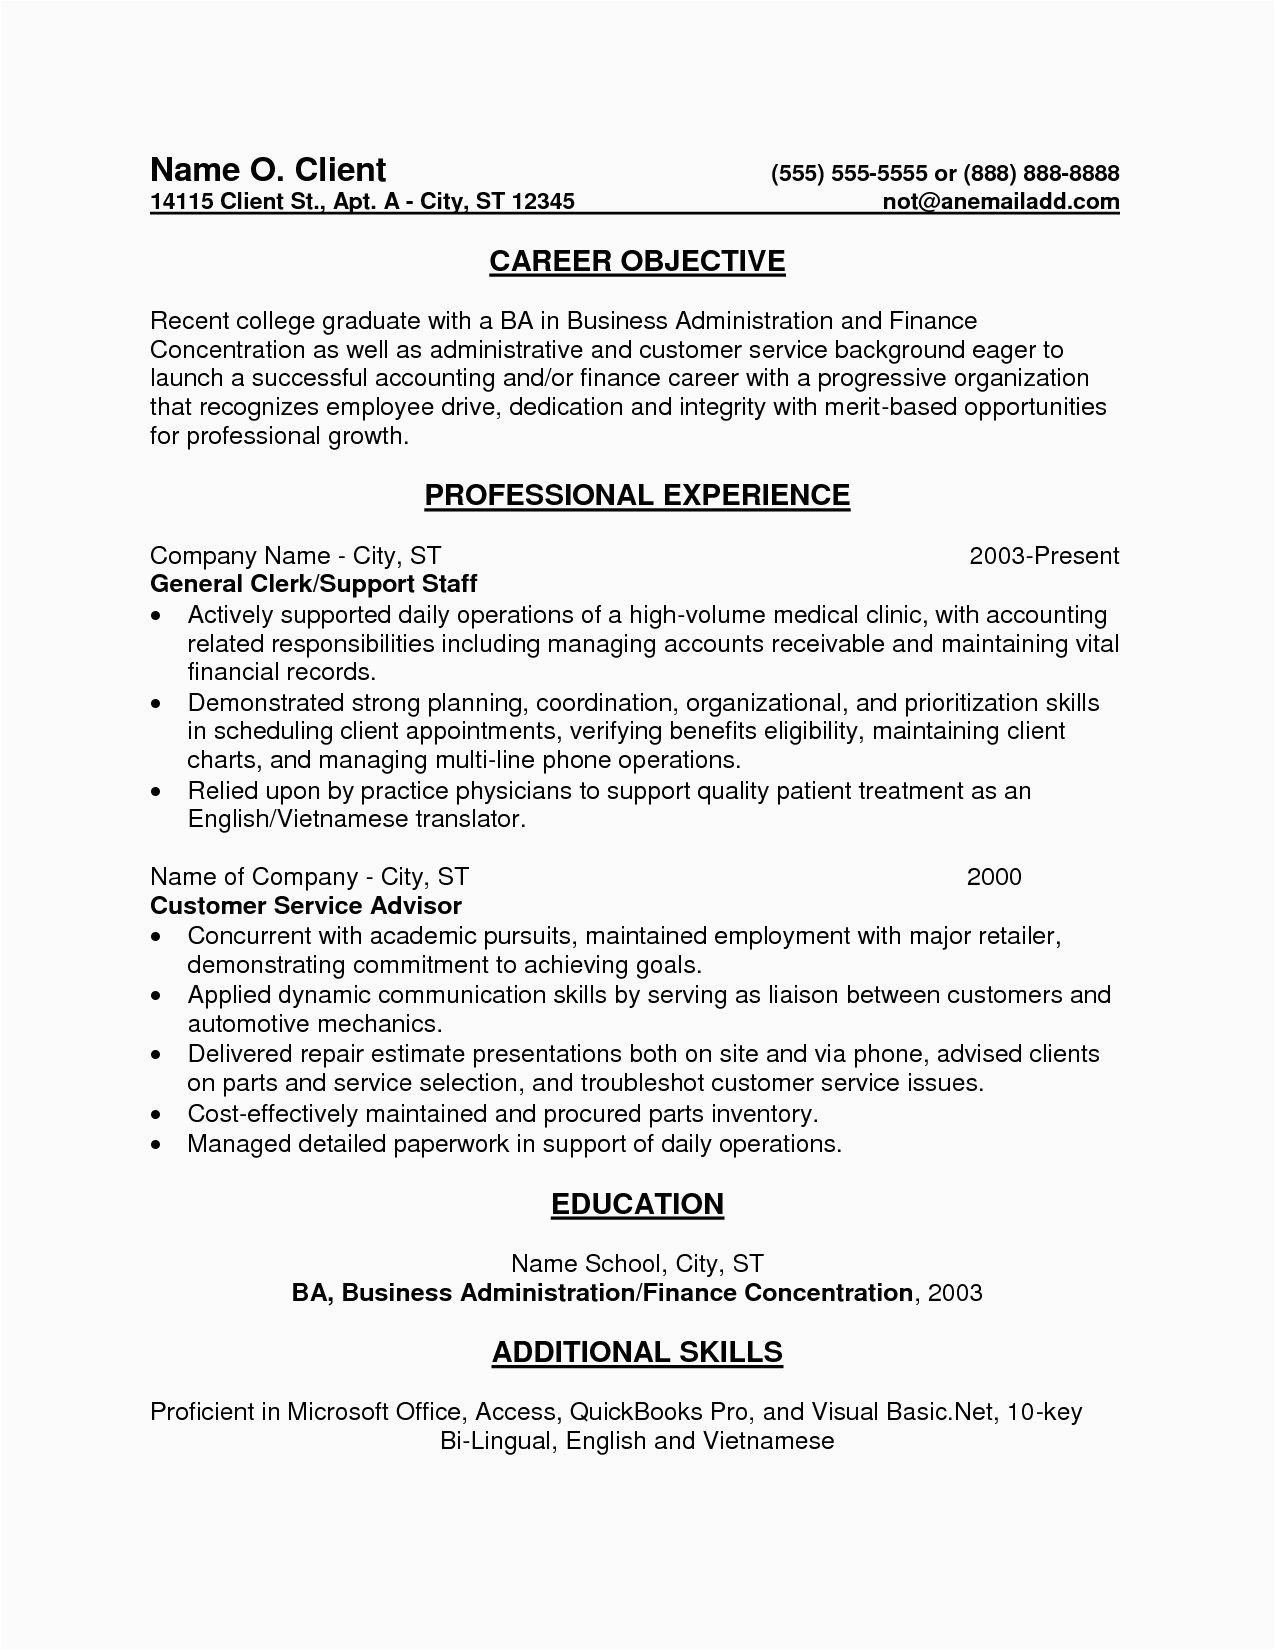 Entry Level Accounting Bookkeeping Resume Sample 25 Entry Level Accounting Cover Letter In 2020